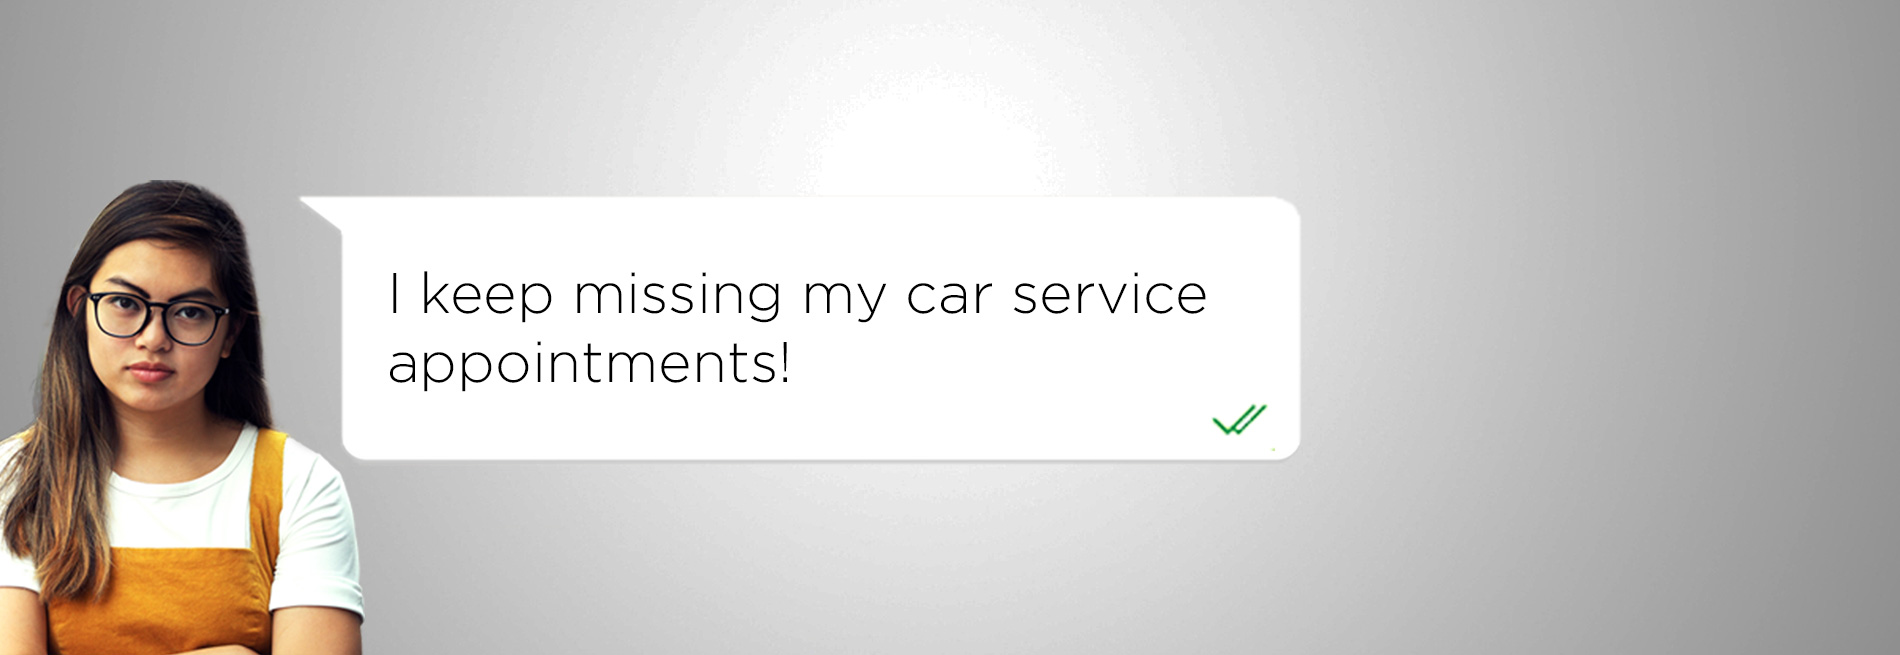 I keep missing my car service appointments!